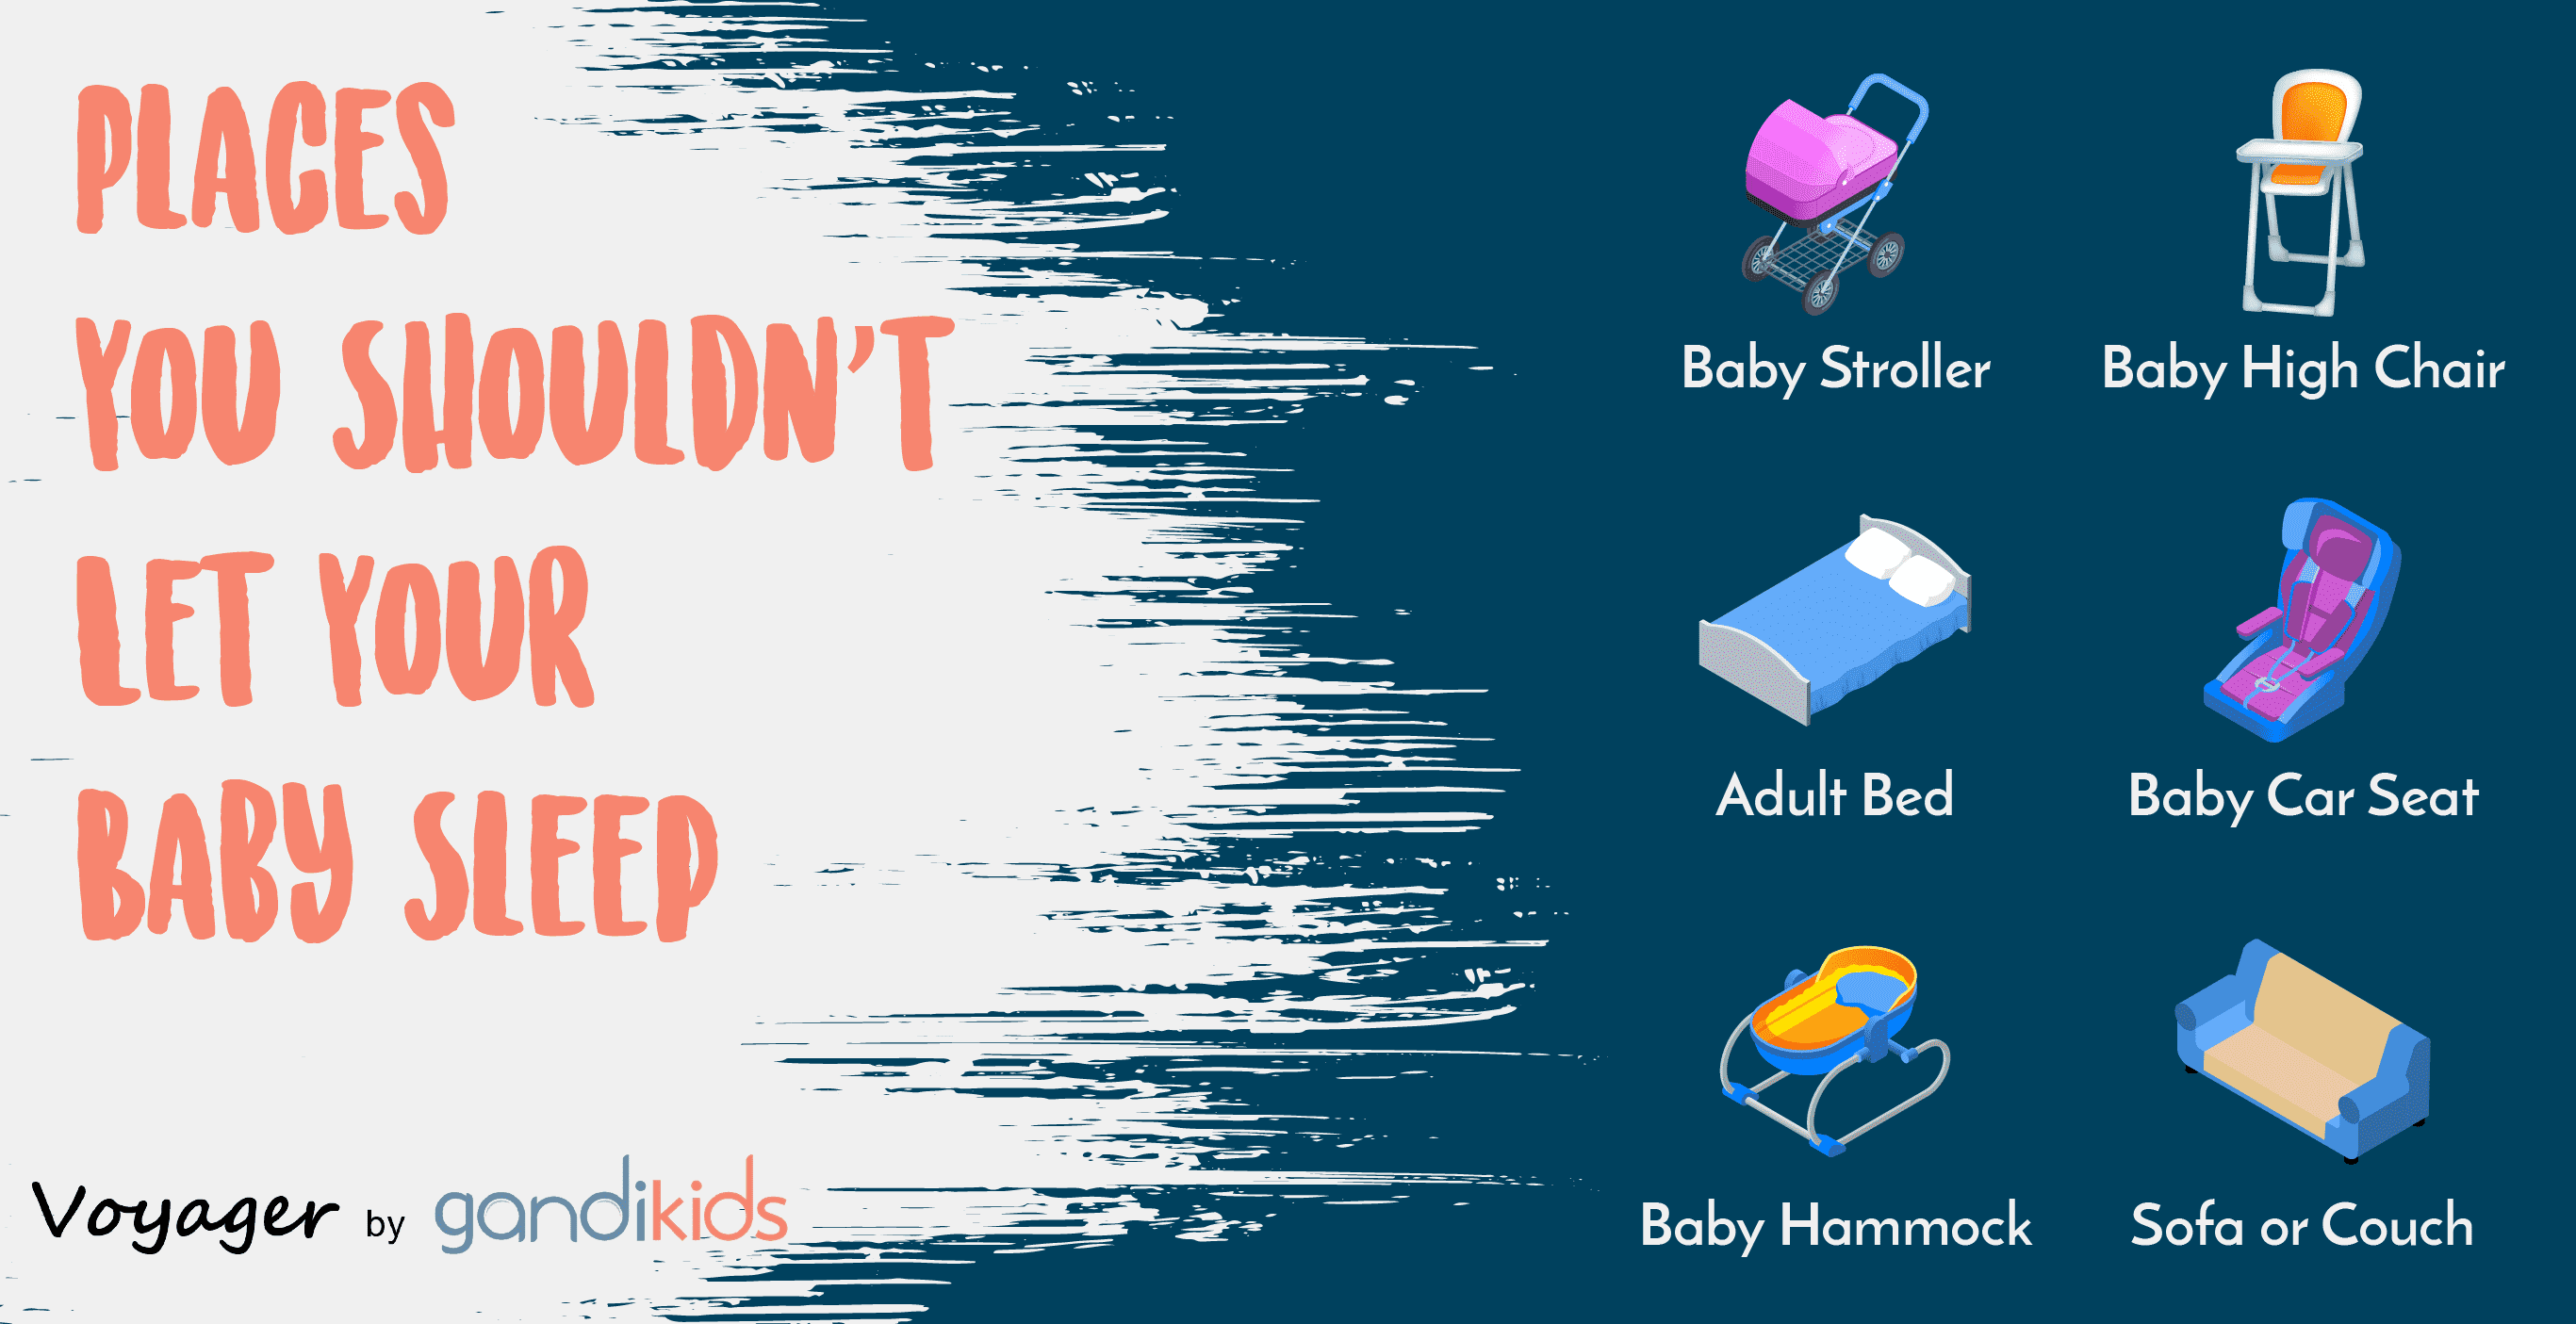 Can baby sleep in high chair? Worst places to let your baby sleep